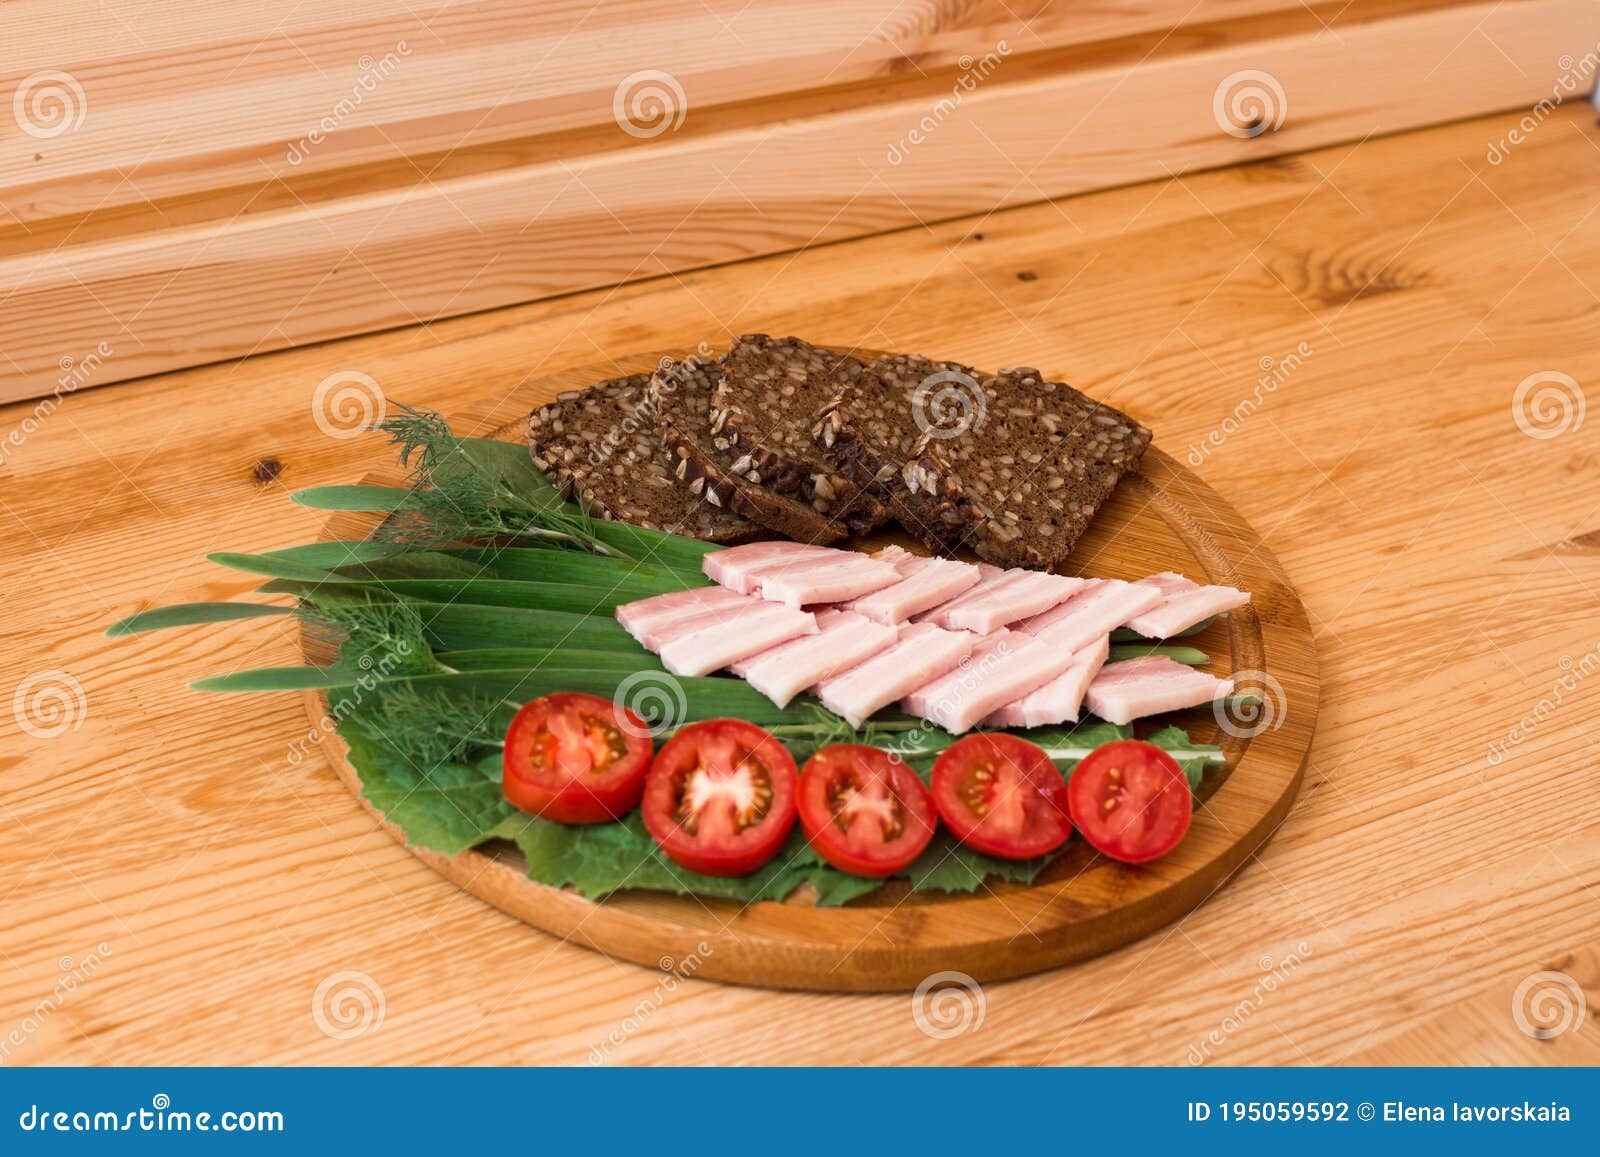 on the wooden table top is a round board with sliced black bread with seeds, smoked brisket, tomatoes and herbs